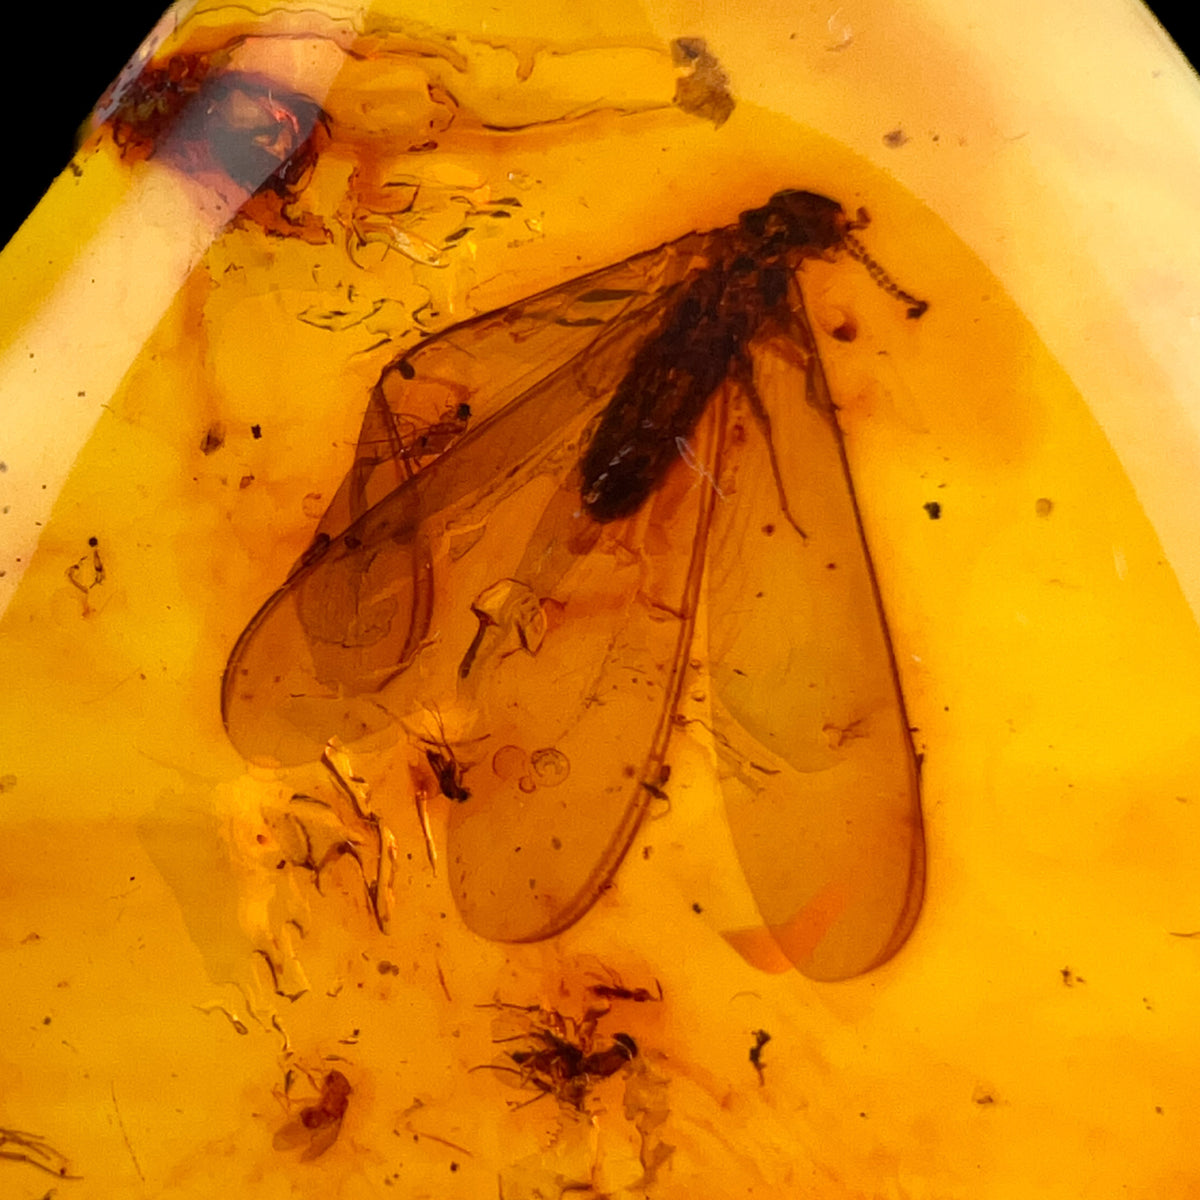 Close up of Insects trapped inside Amber